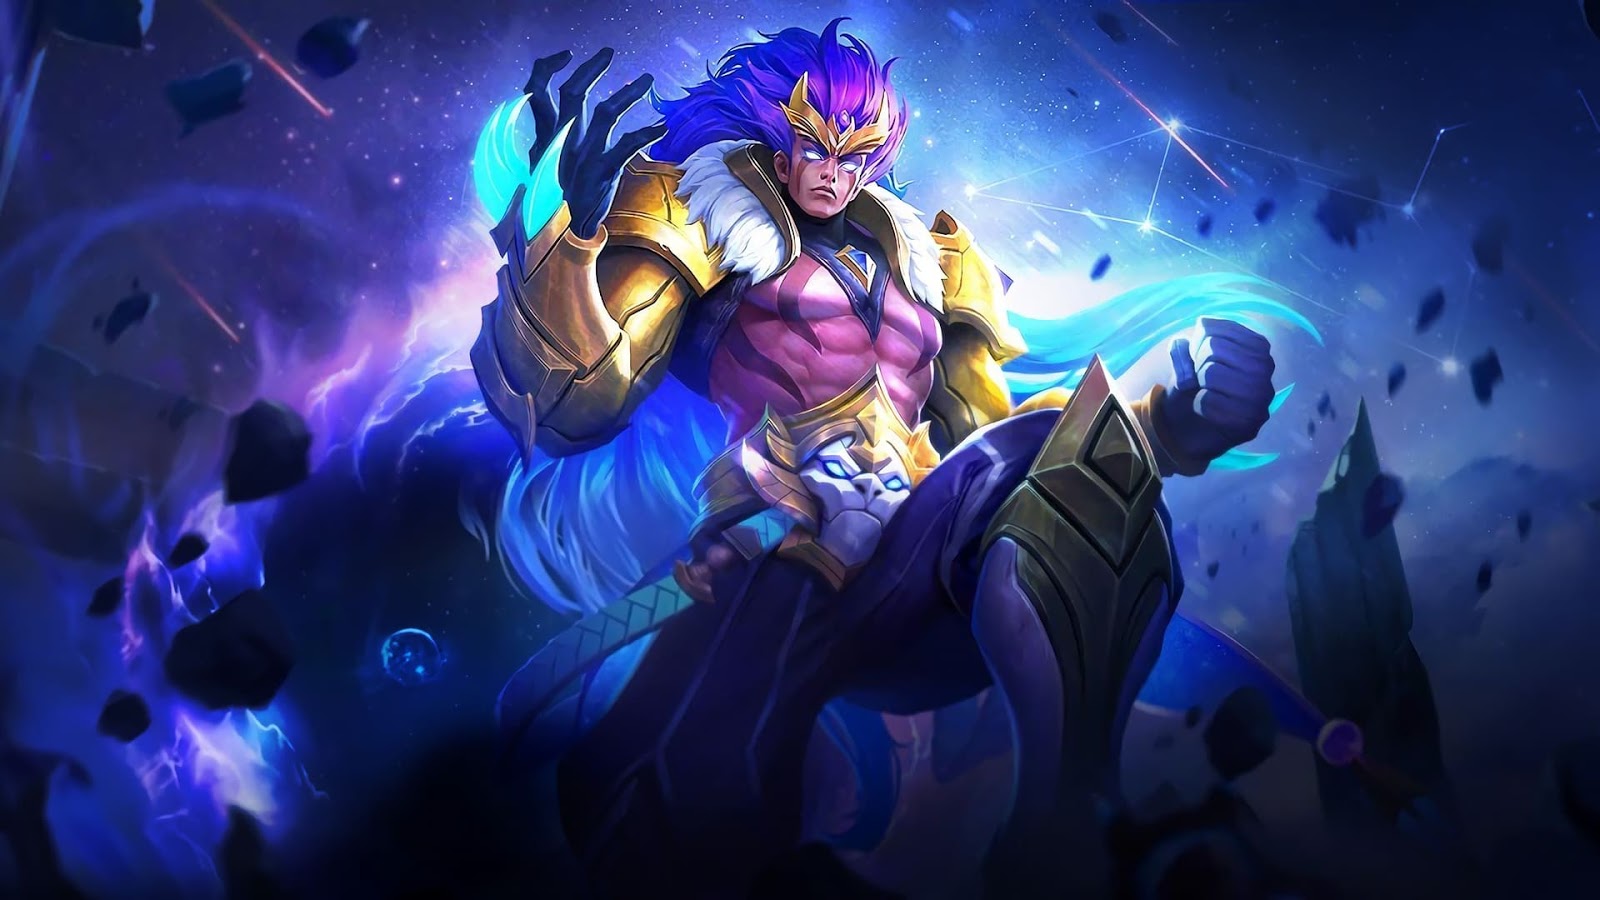 10 Wallpaper Badang Mobile Legends (ML) Full HD for PC, Android & iOS